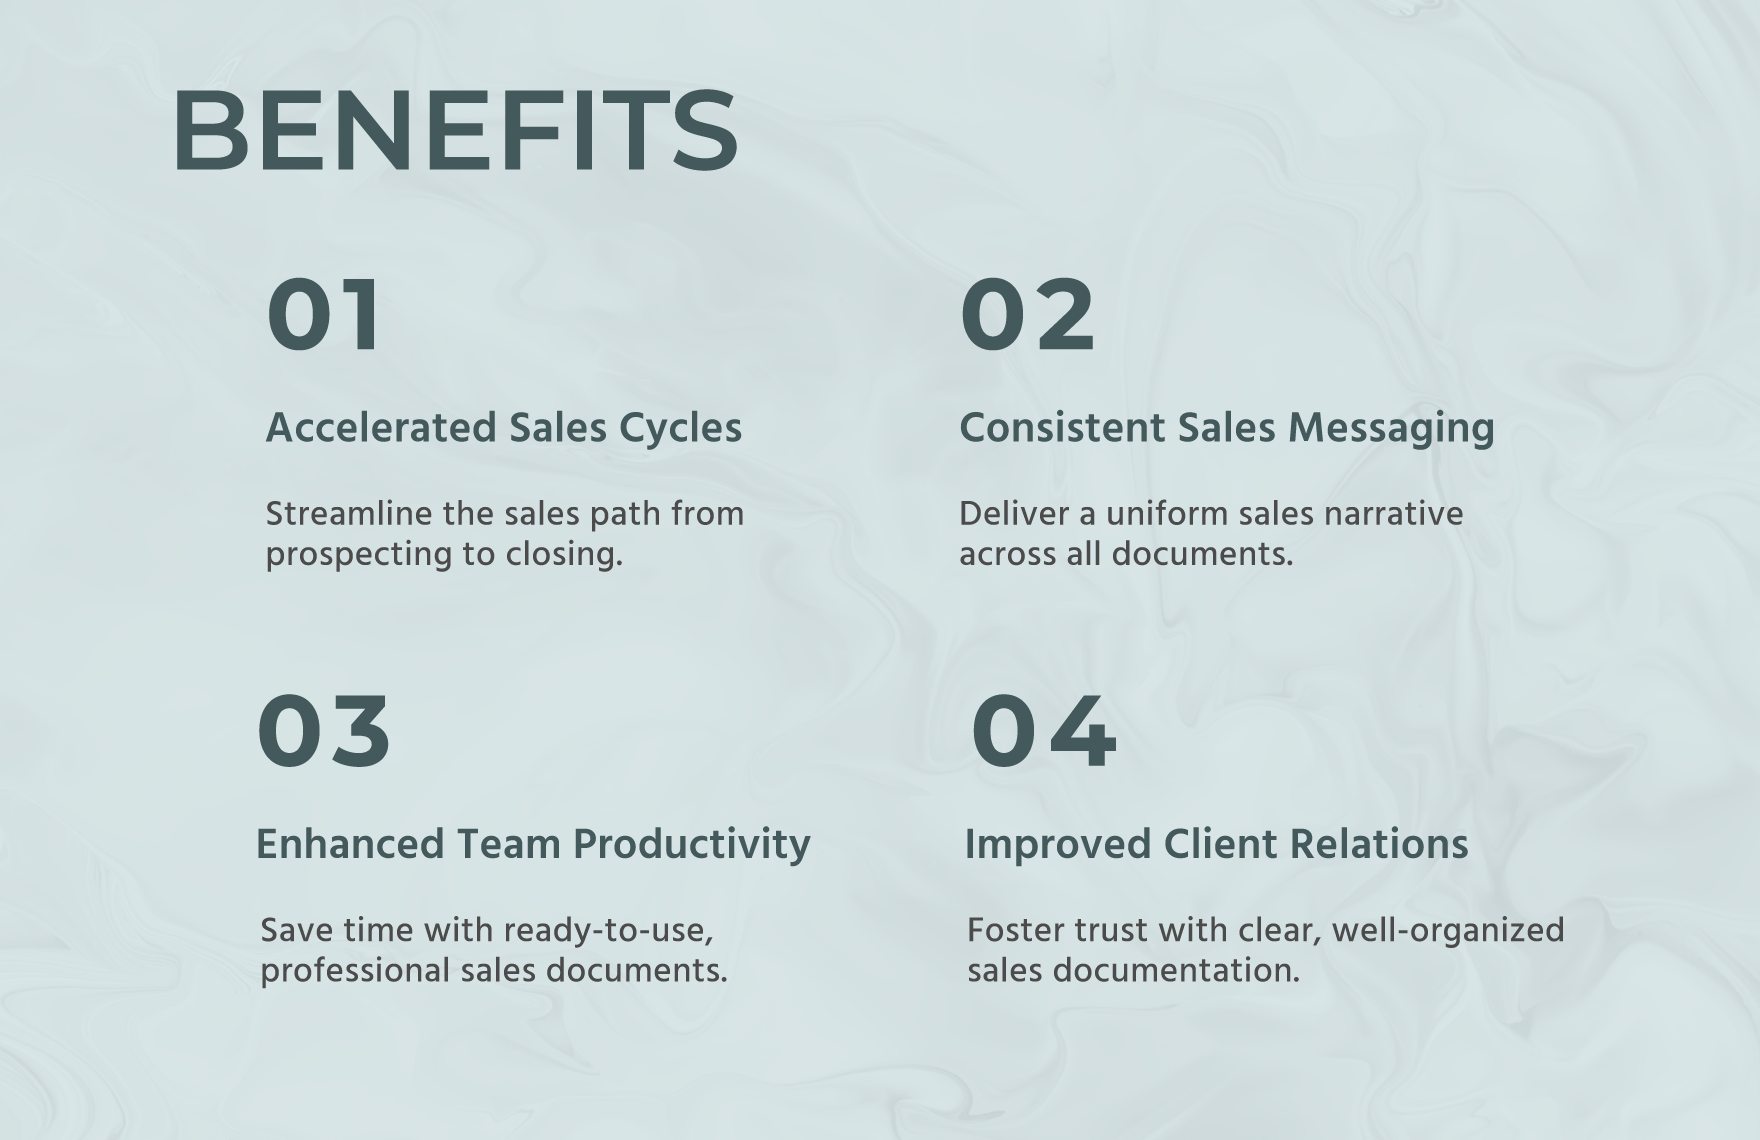 Sales Accepted Proposal Resolution Template